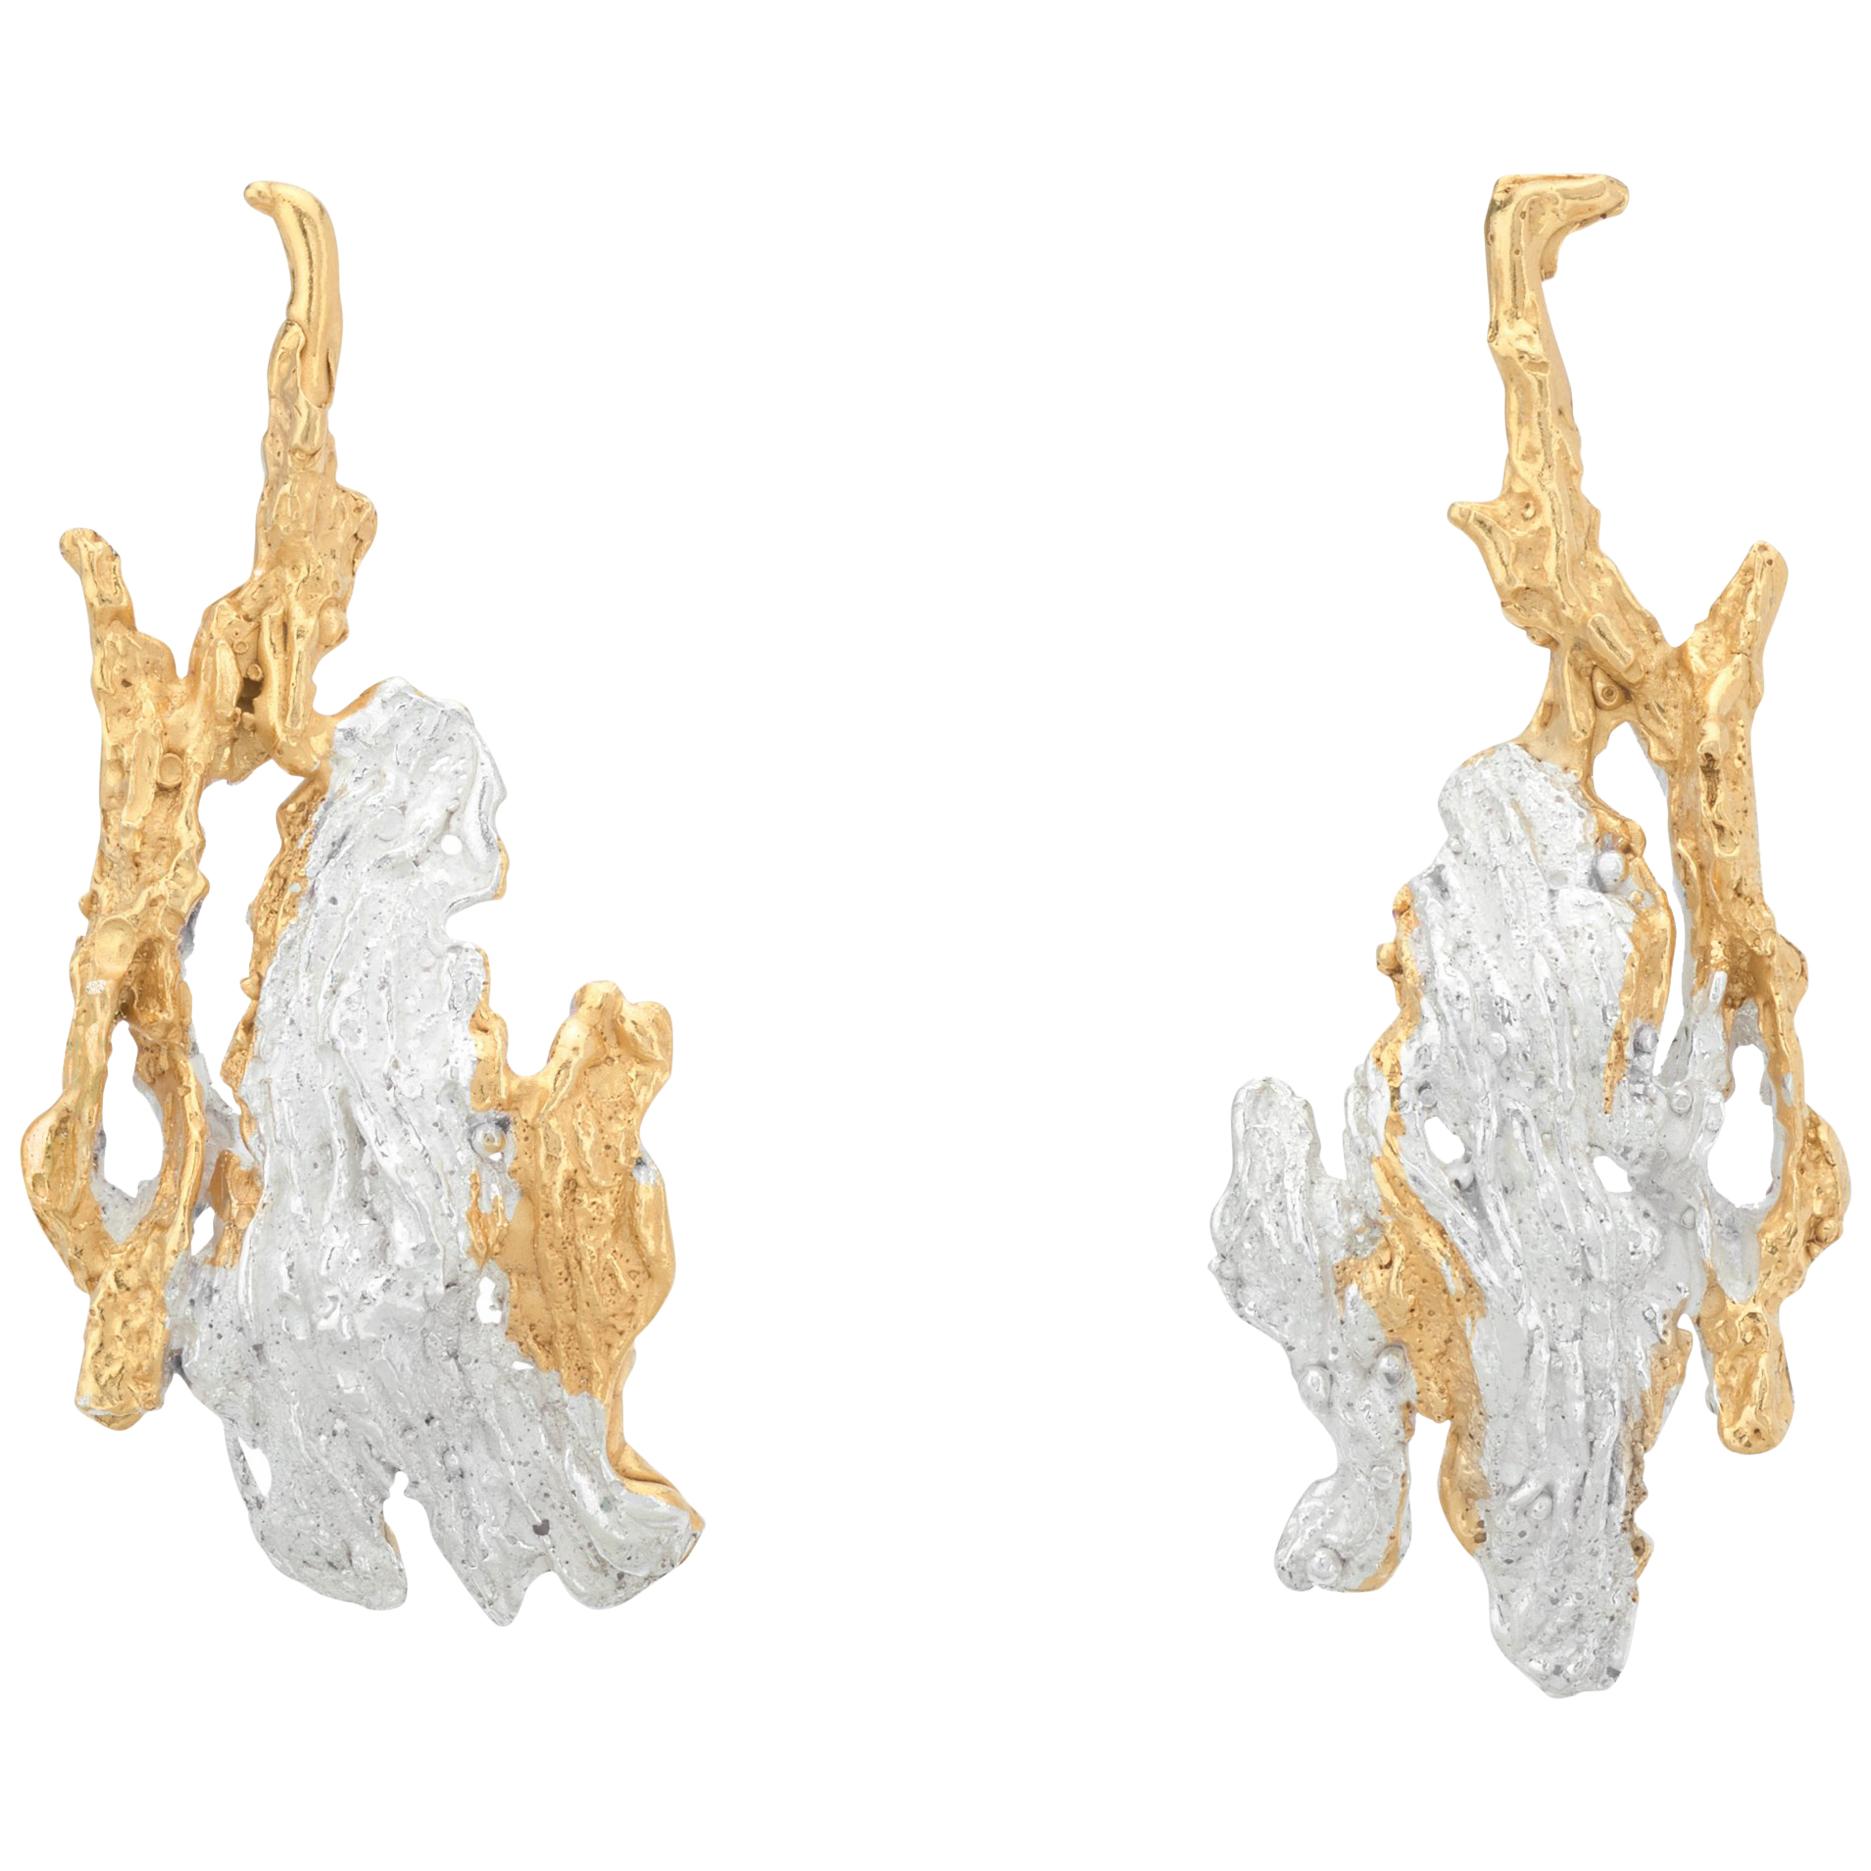 Loveness Lee - Sequoia -  Small Gold and Silver Drop Textured Earrings For Sale